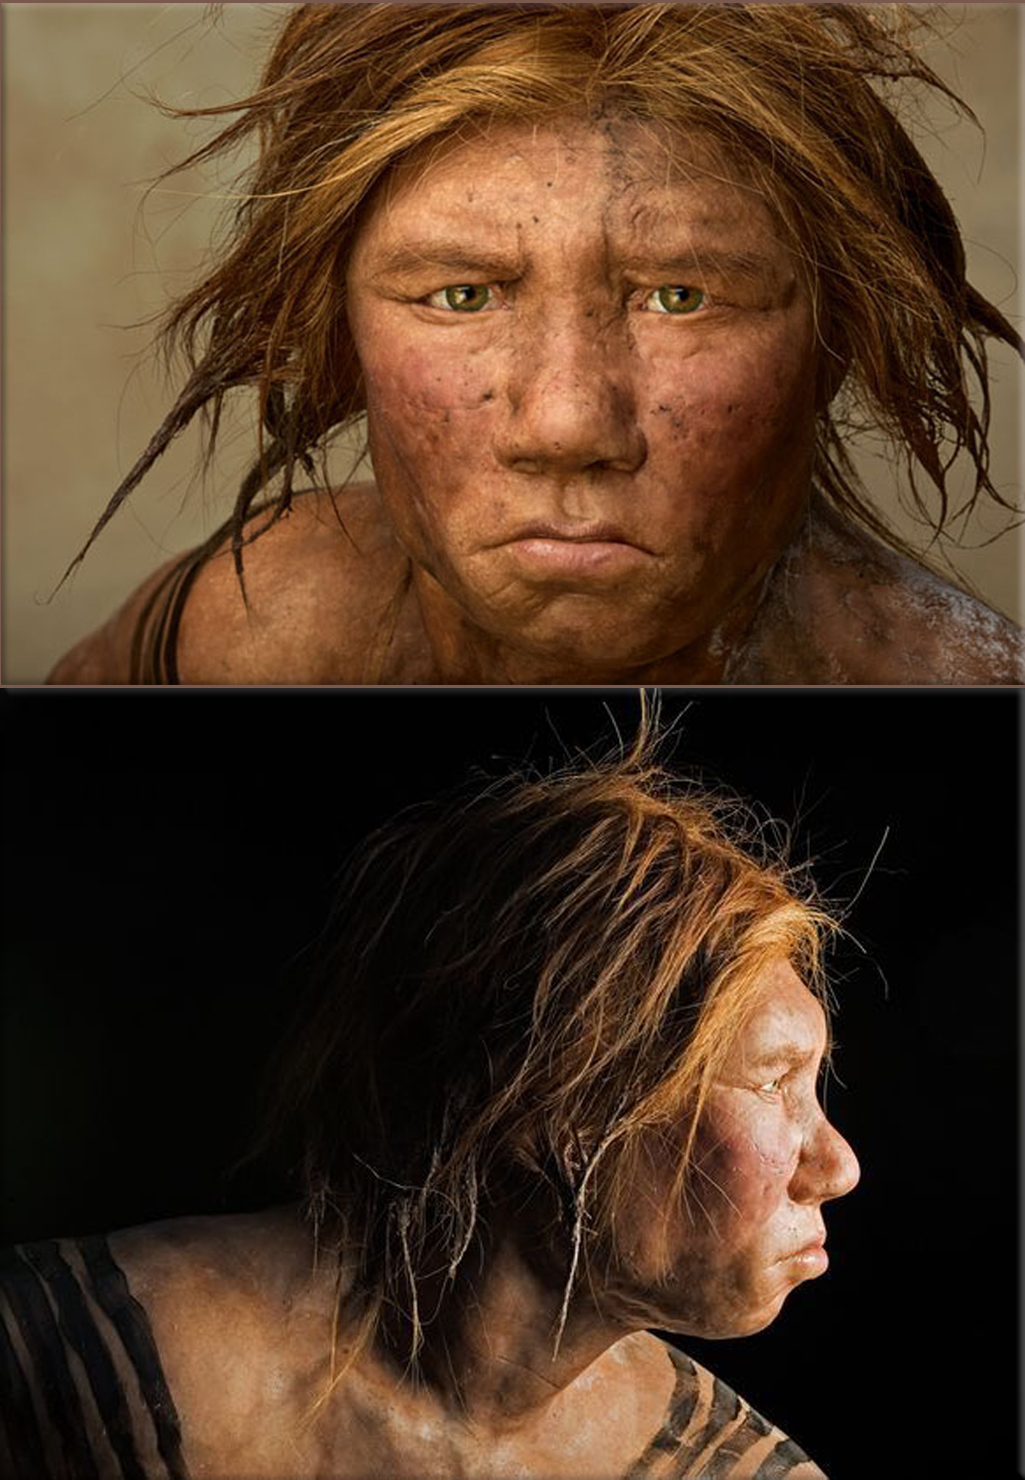 In London scientists report the findings of the DNA analysis of a Neanderthal skeleton which supports the 'out of Africa theory' of human evolution placing an 'African Eve' at 100,000 to 200,000 years ago